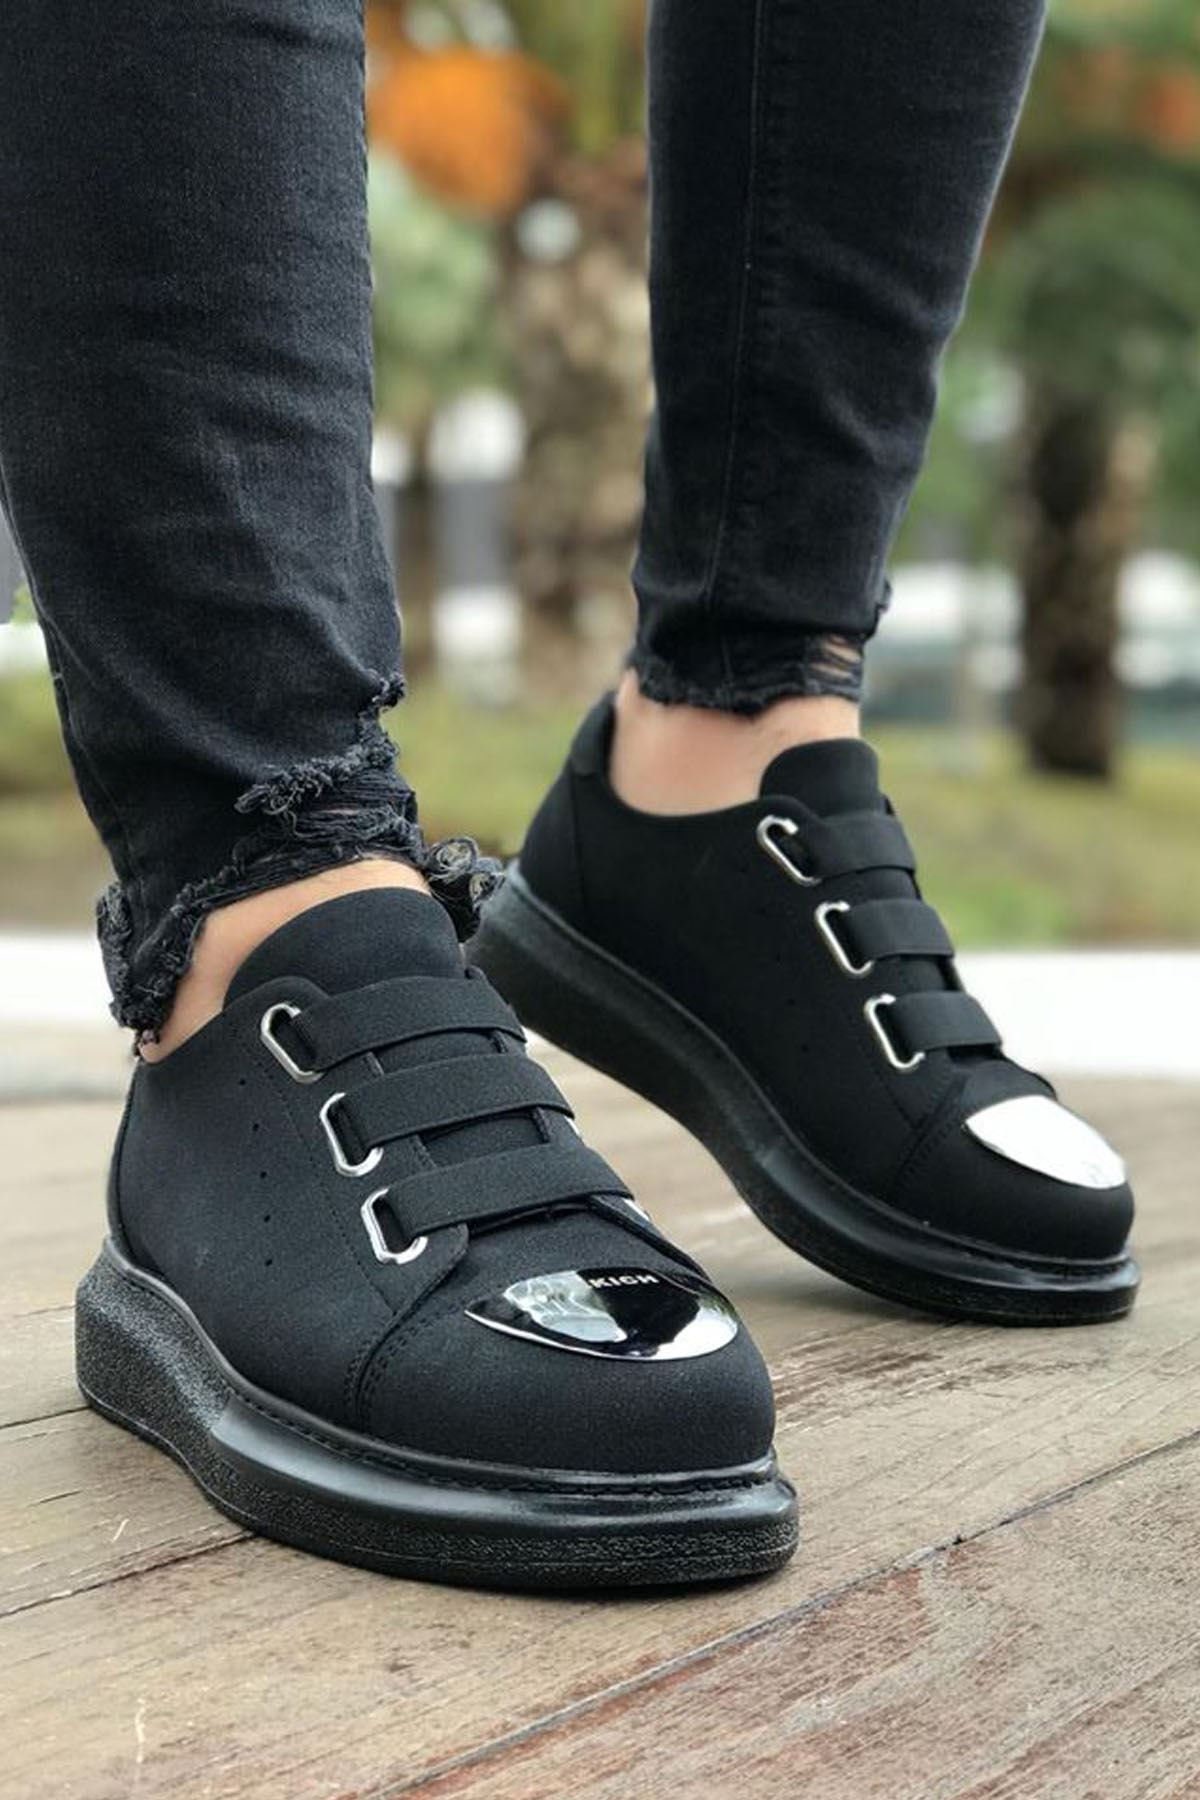 Women Sports Shoes Breathable Quick dry Shoes Woman Upstream Outdoor